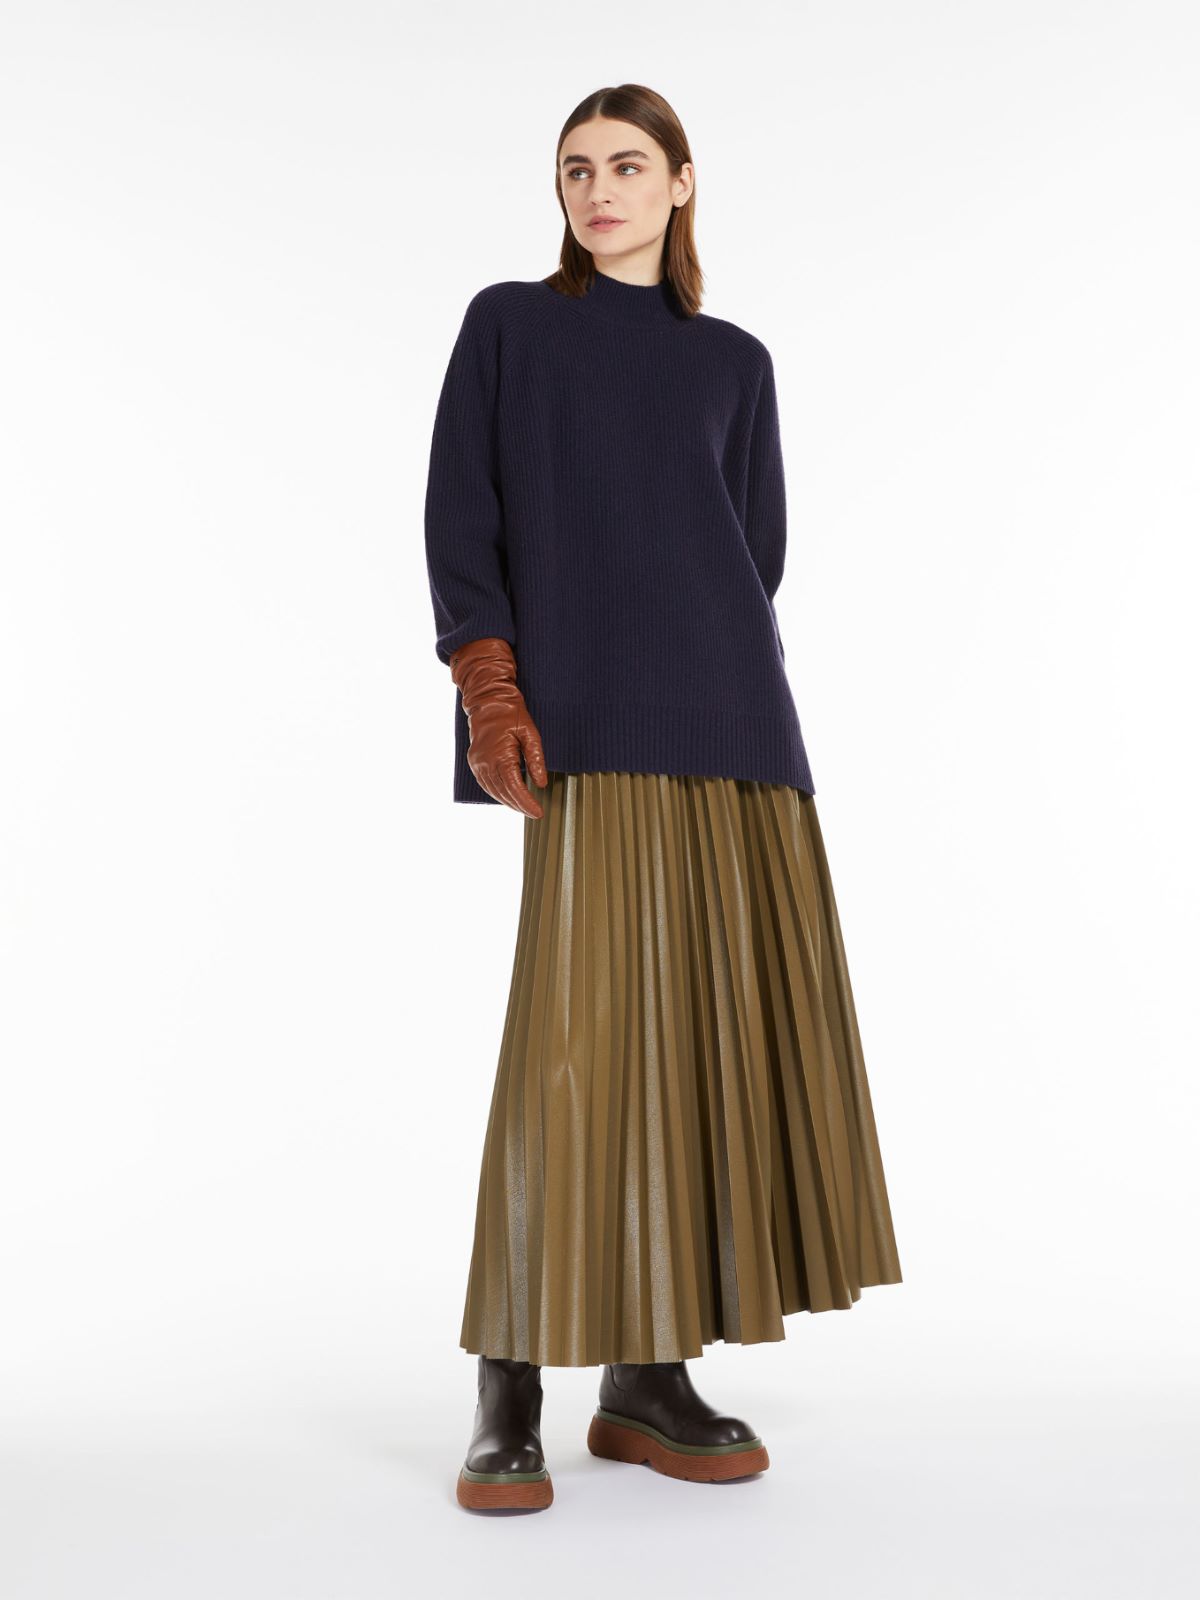 Weekend by Maxmara Giugno Quilted Jersey A-line Skirt in Black